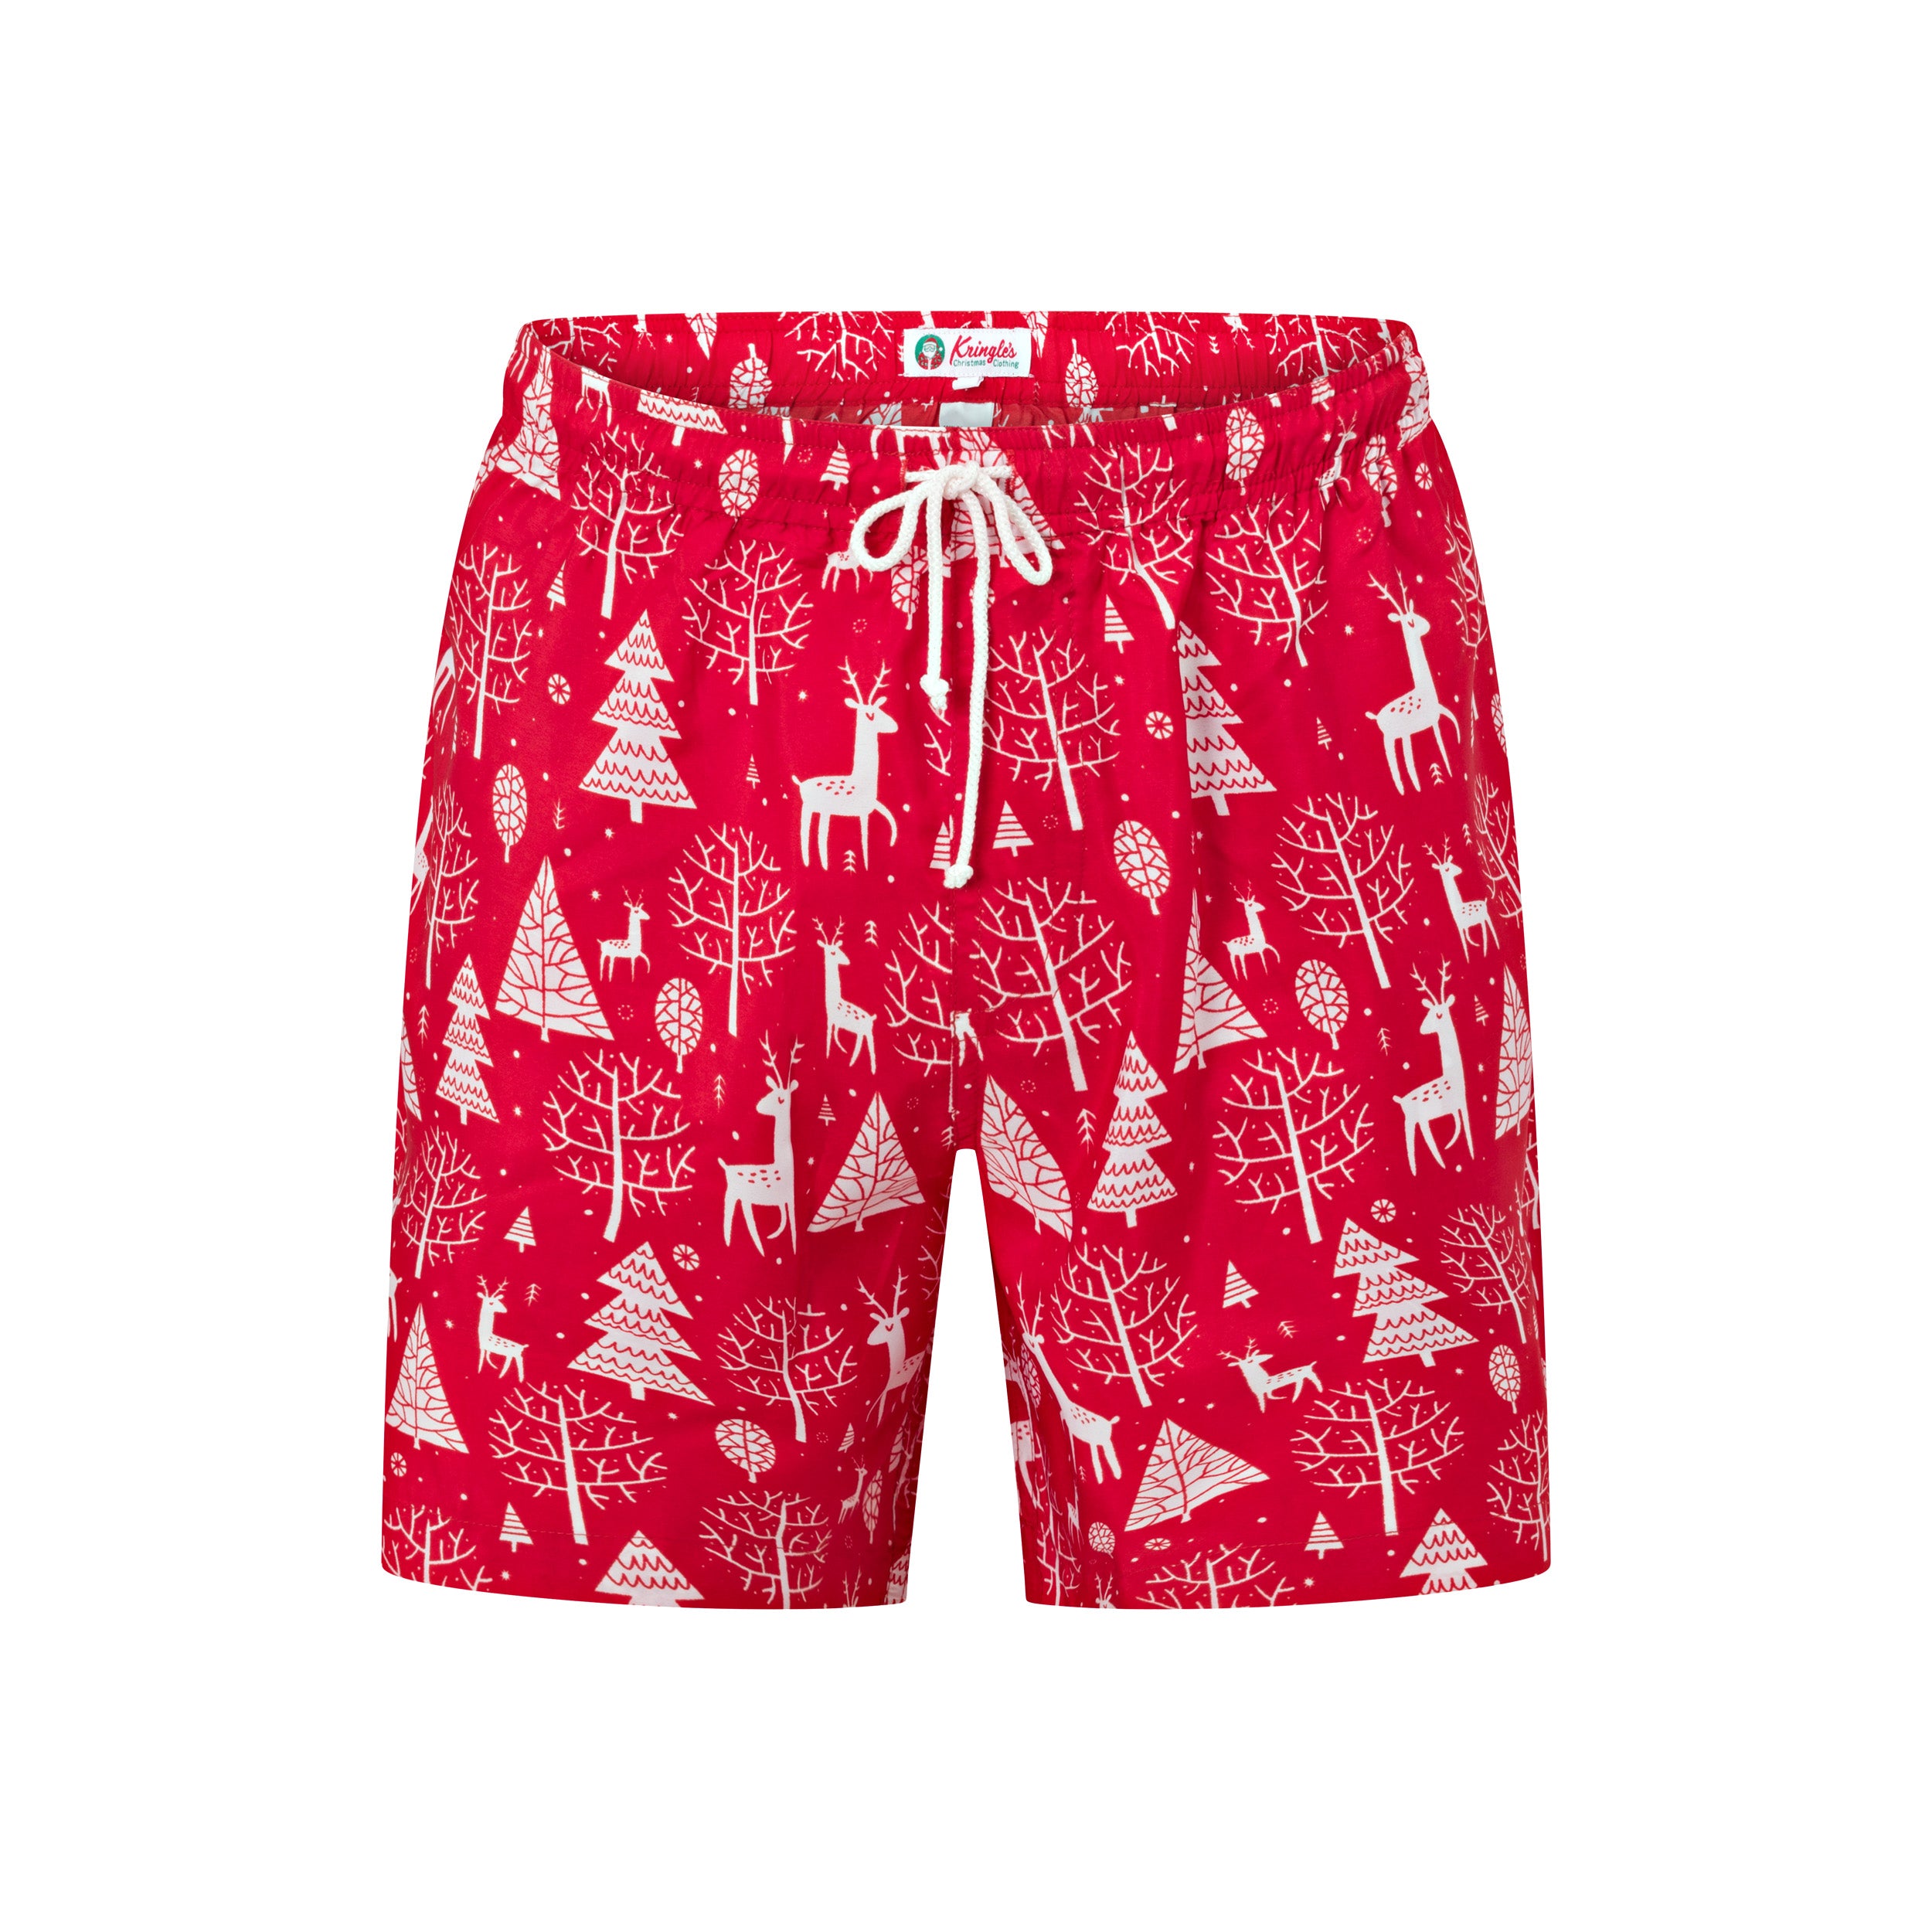 Reindeer Red Christmas Adult Shorts